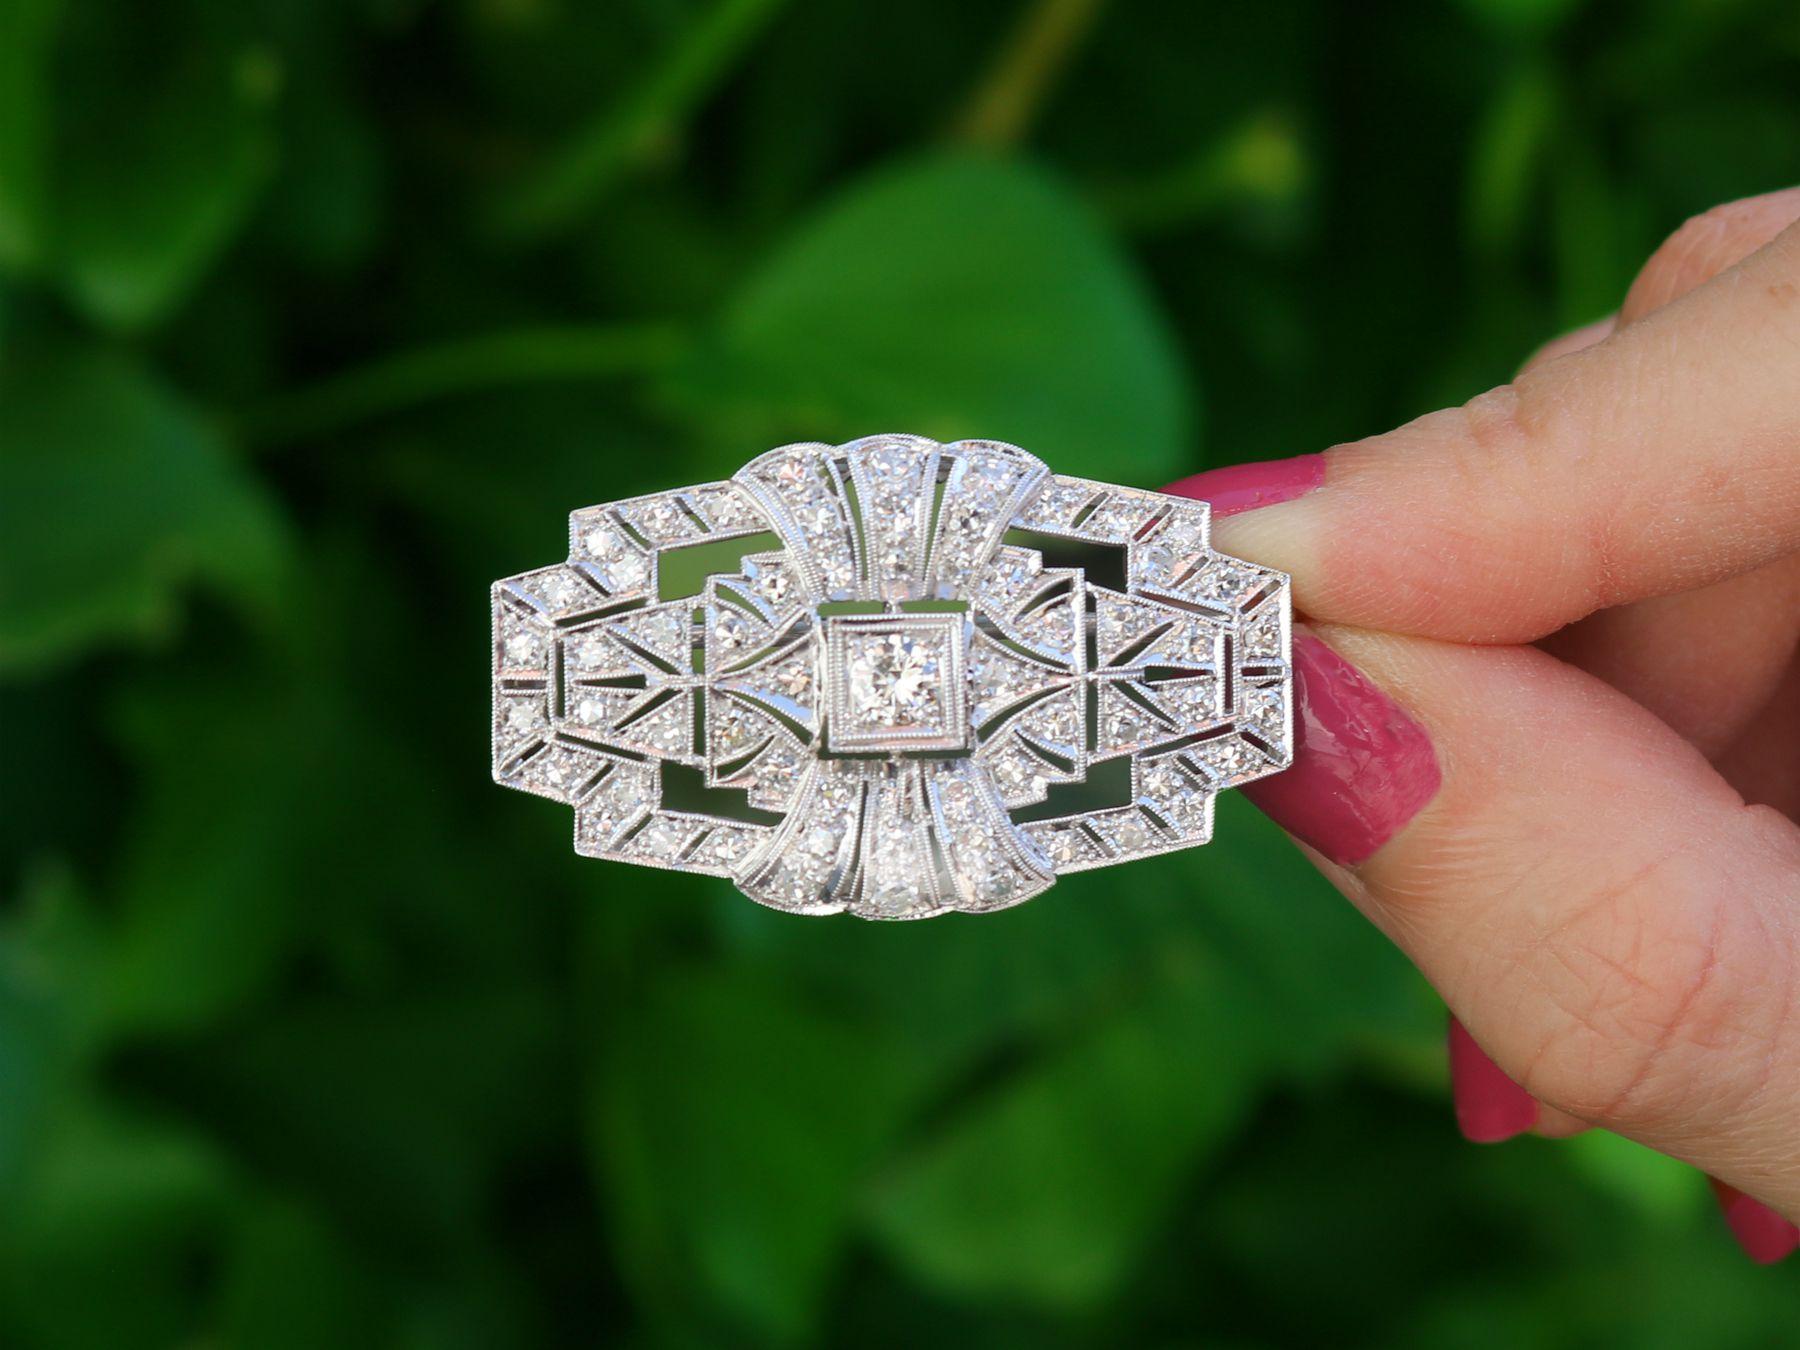 A stunning, fine and impressive Art Deco 2.16 carat diamond and platinum brooch; part of our diverse antique jewelry and estate jewelry collections.

This stunning, fine and impressive diamond brooch has been crafted in platinum and in the Art Deco